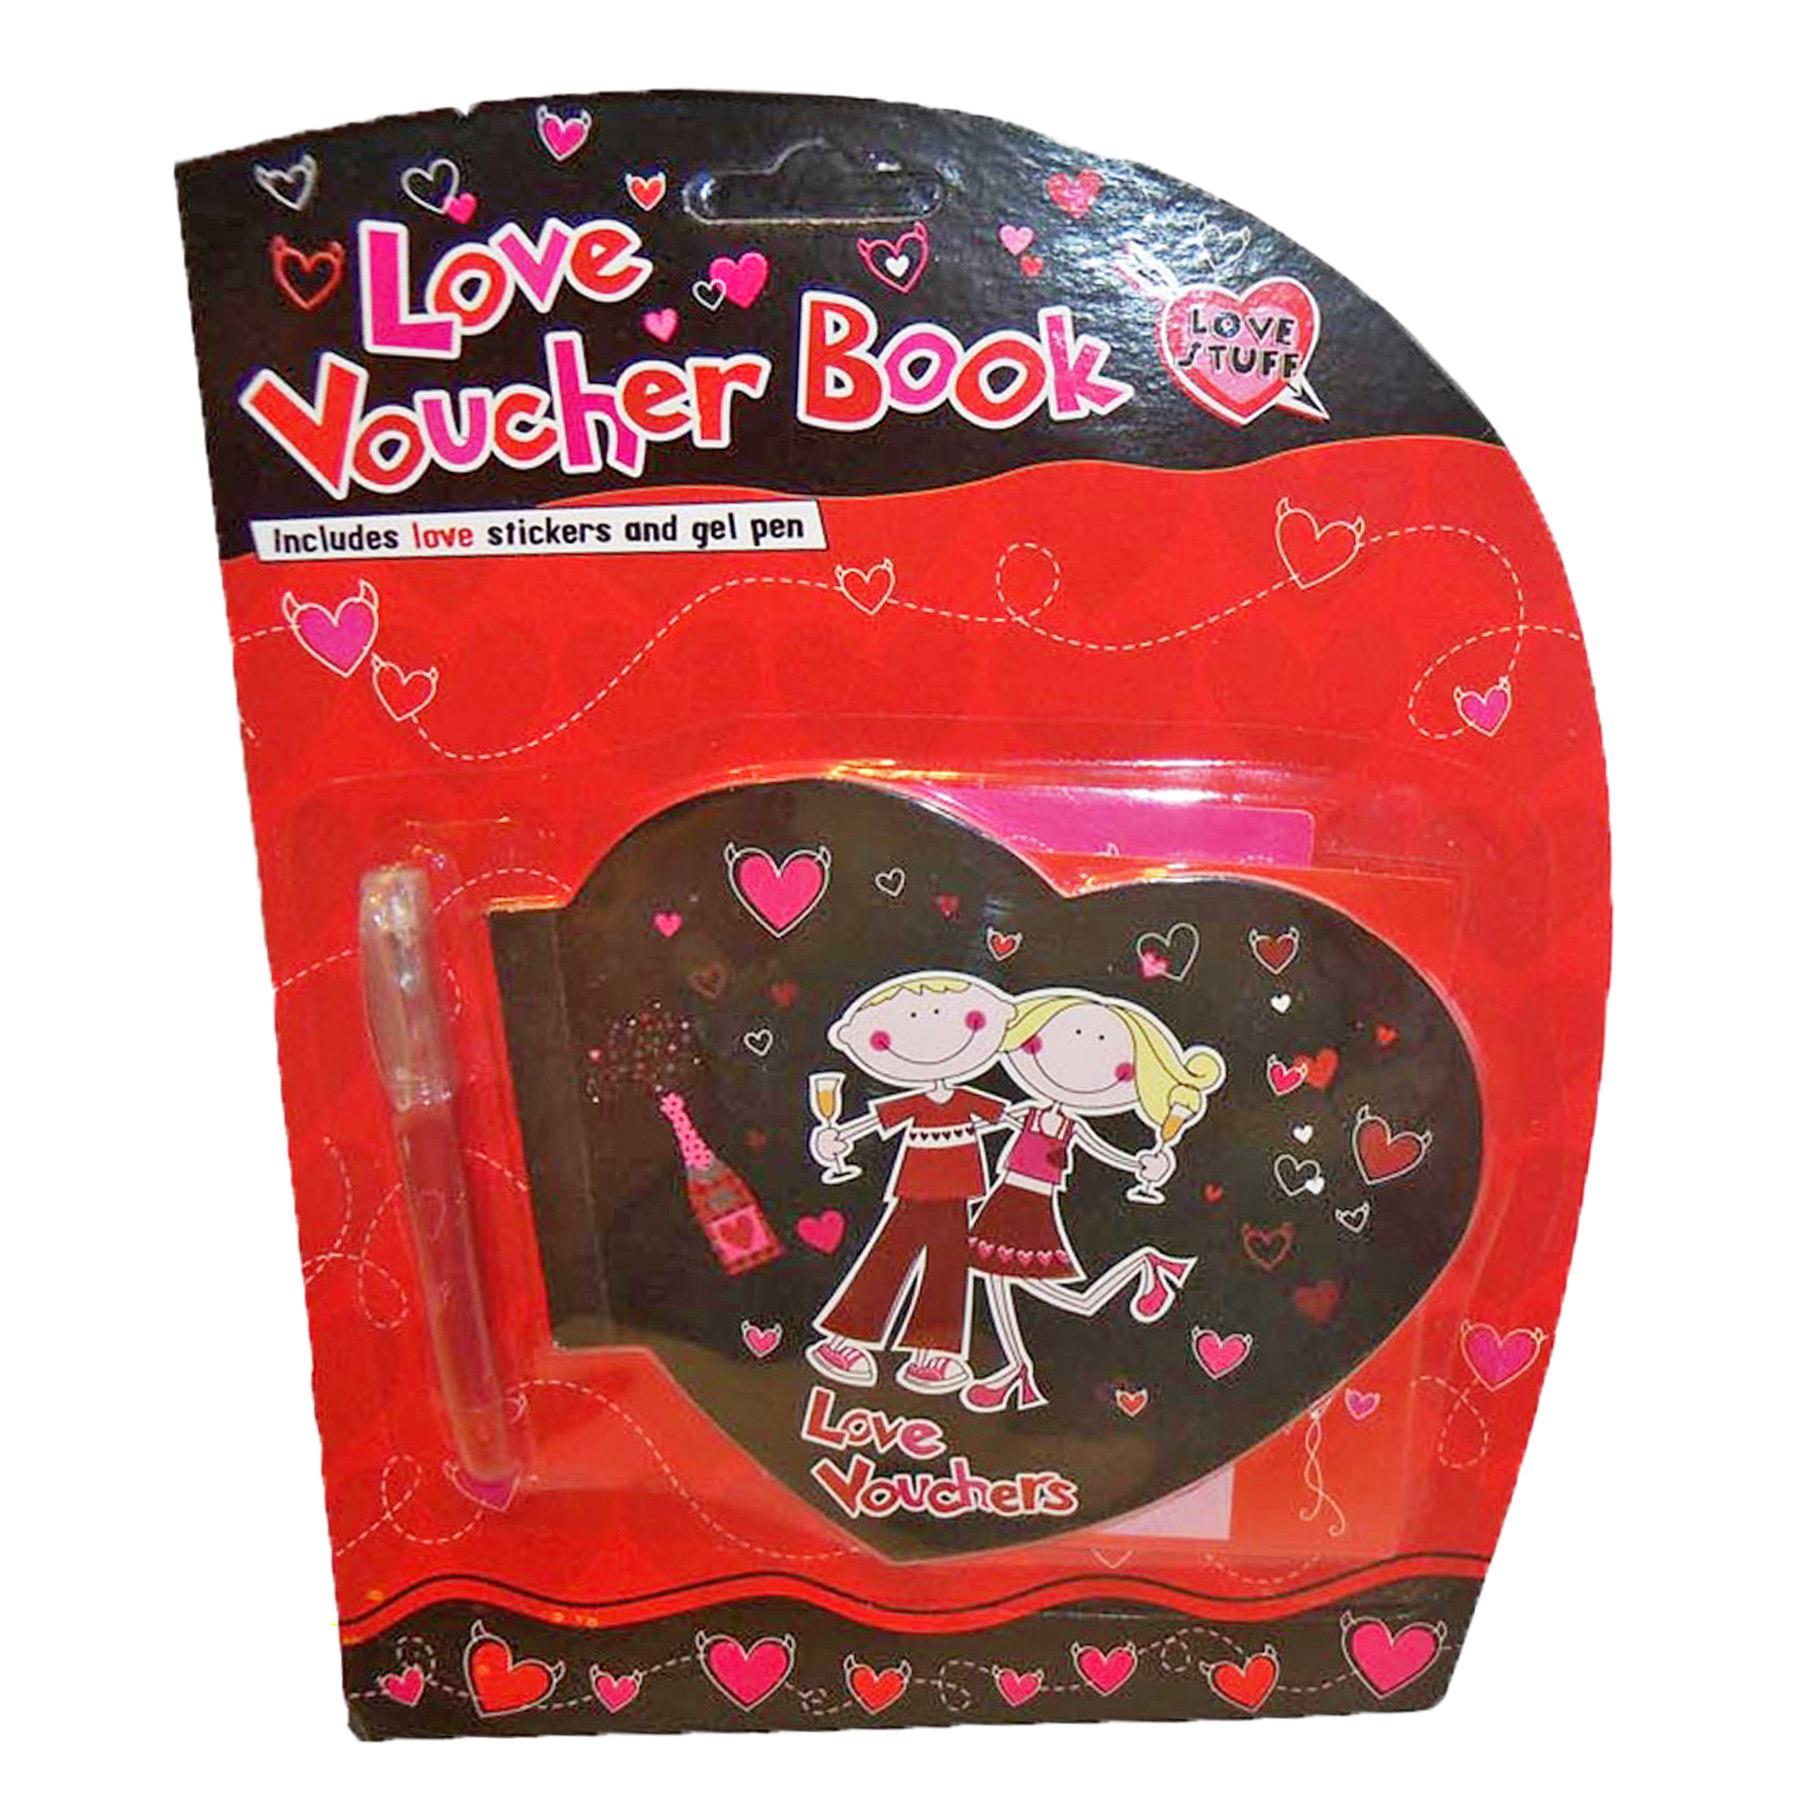 Valentines Day Fun Novelty Gift - Voucher Book with Stickers and Pen